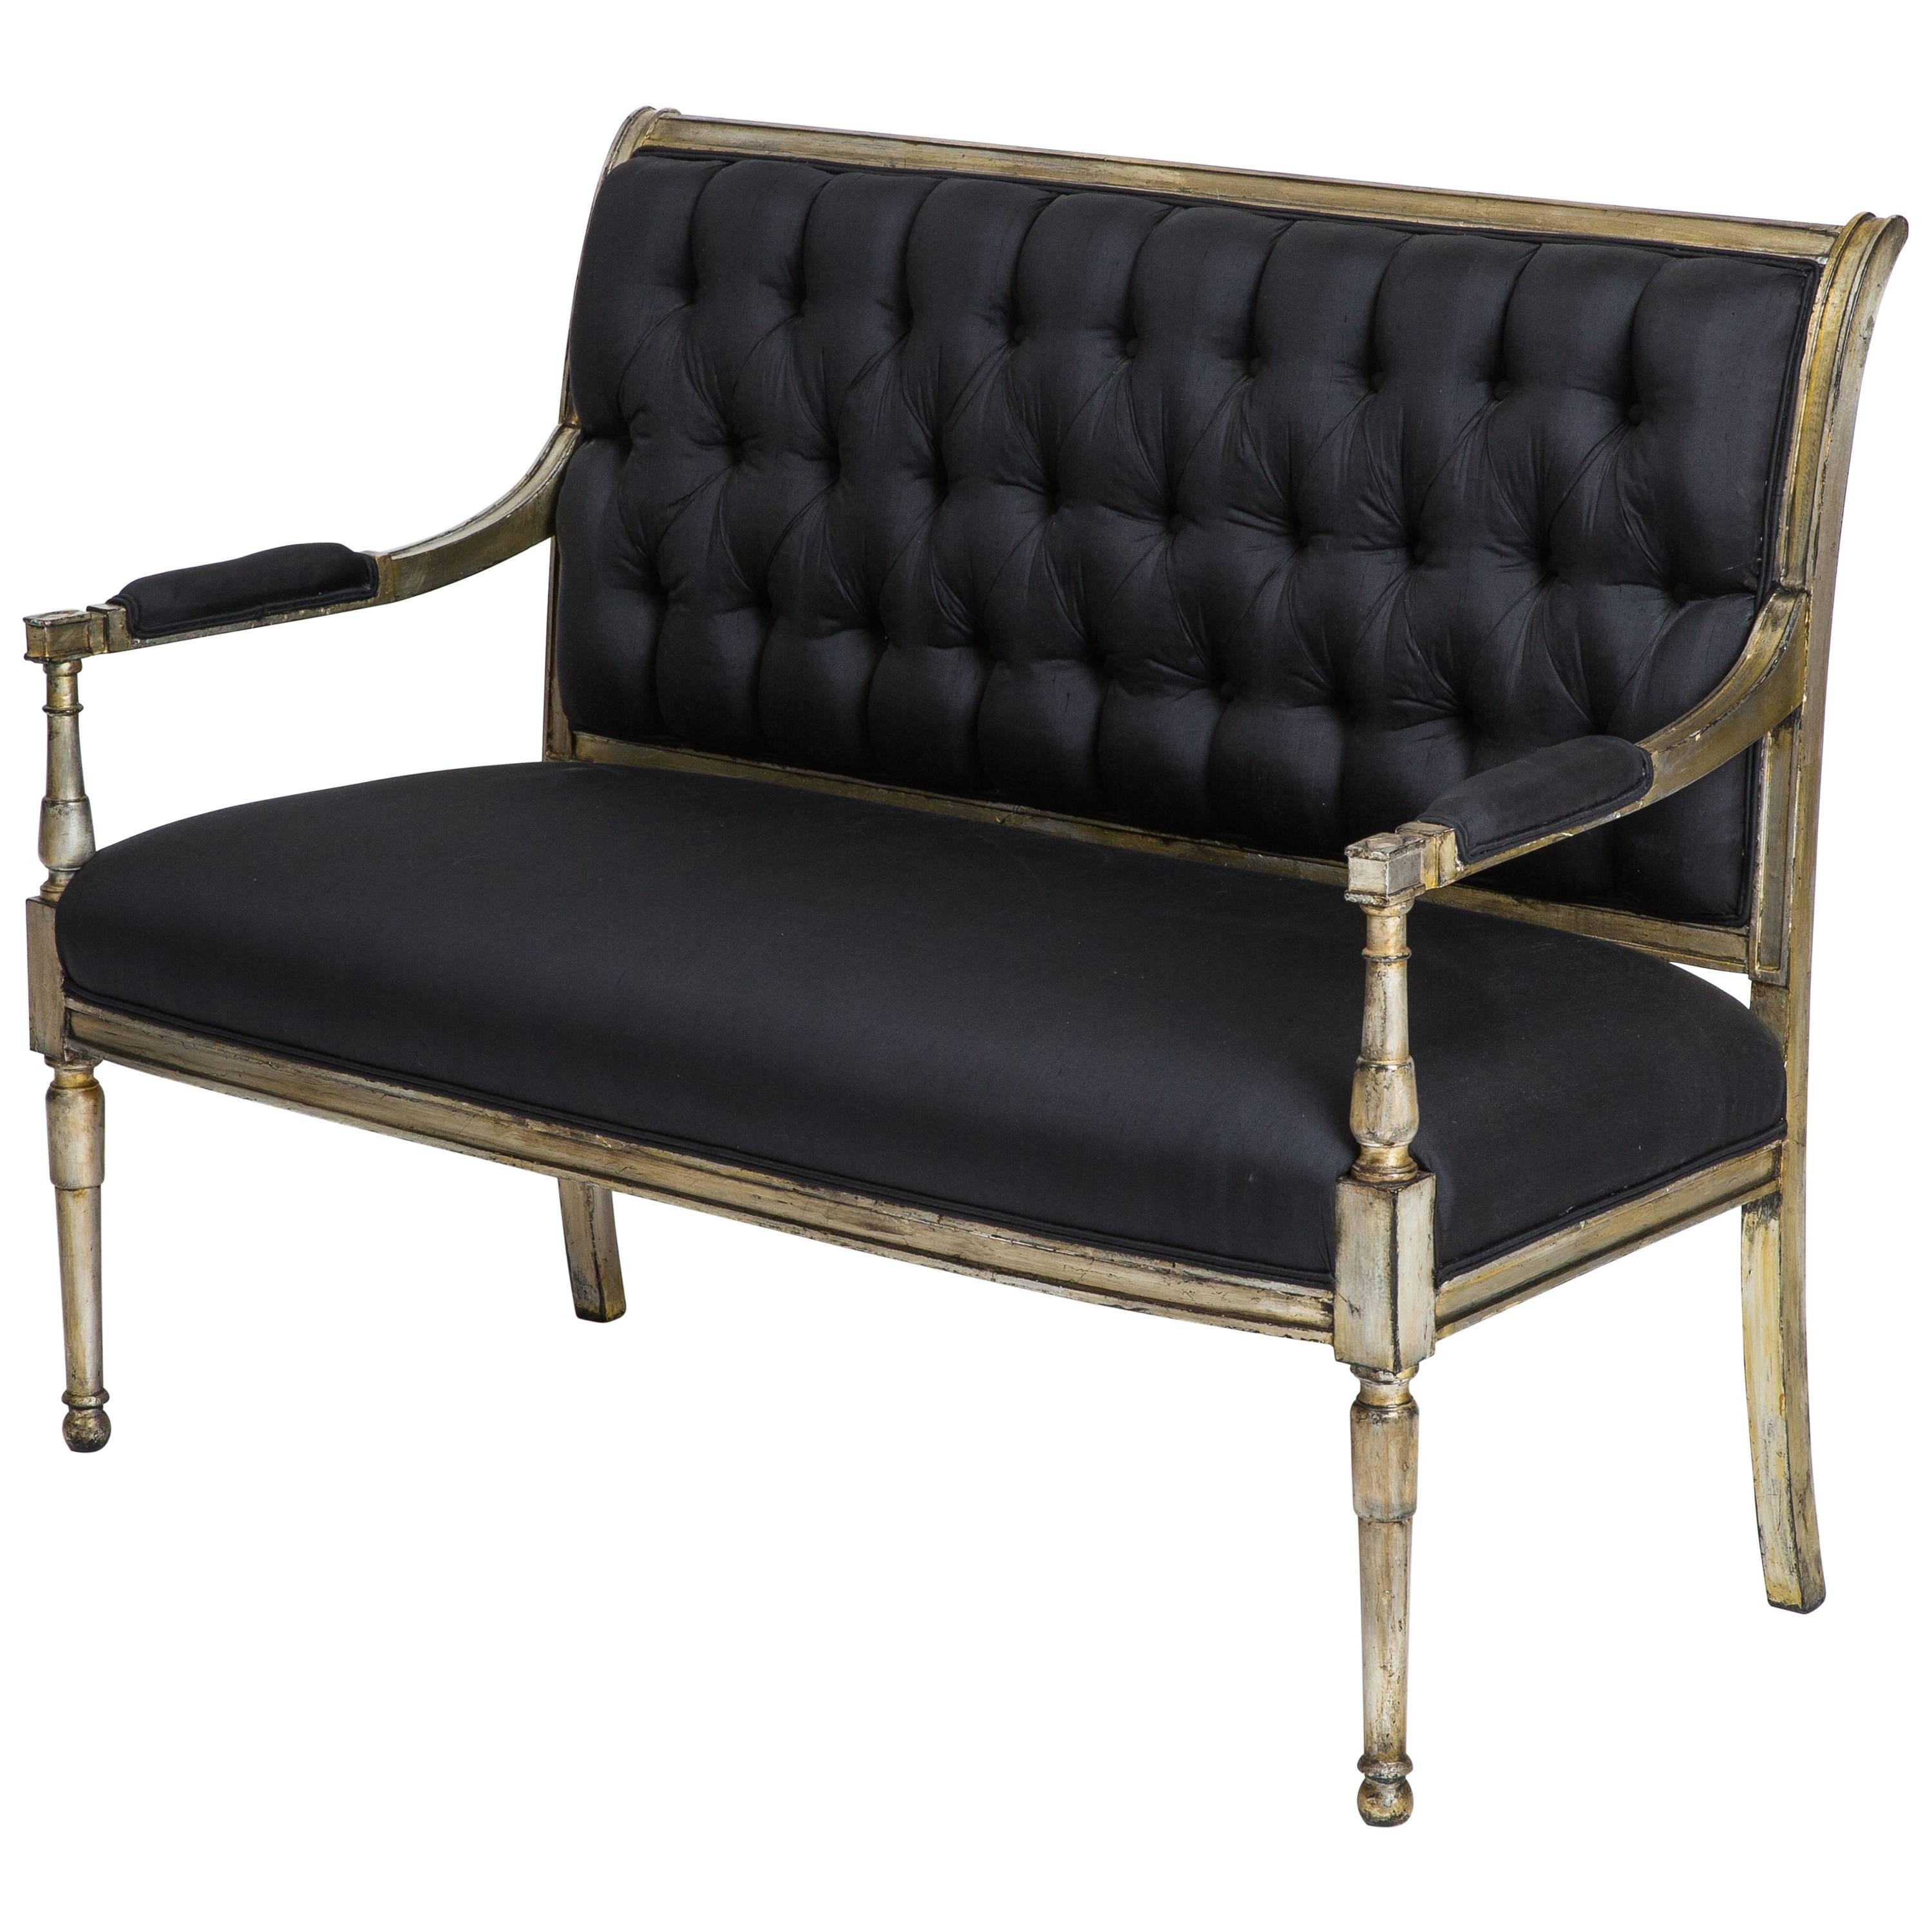 Maison Jansen Rare Stamped Silver Leaf Settee in Black Raw Silk For Sale